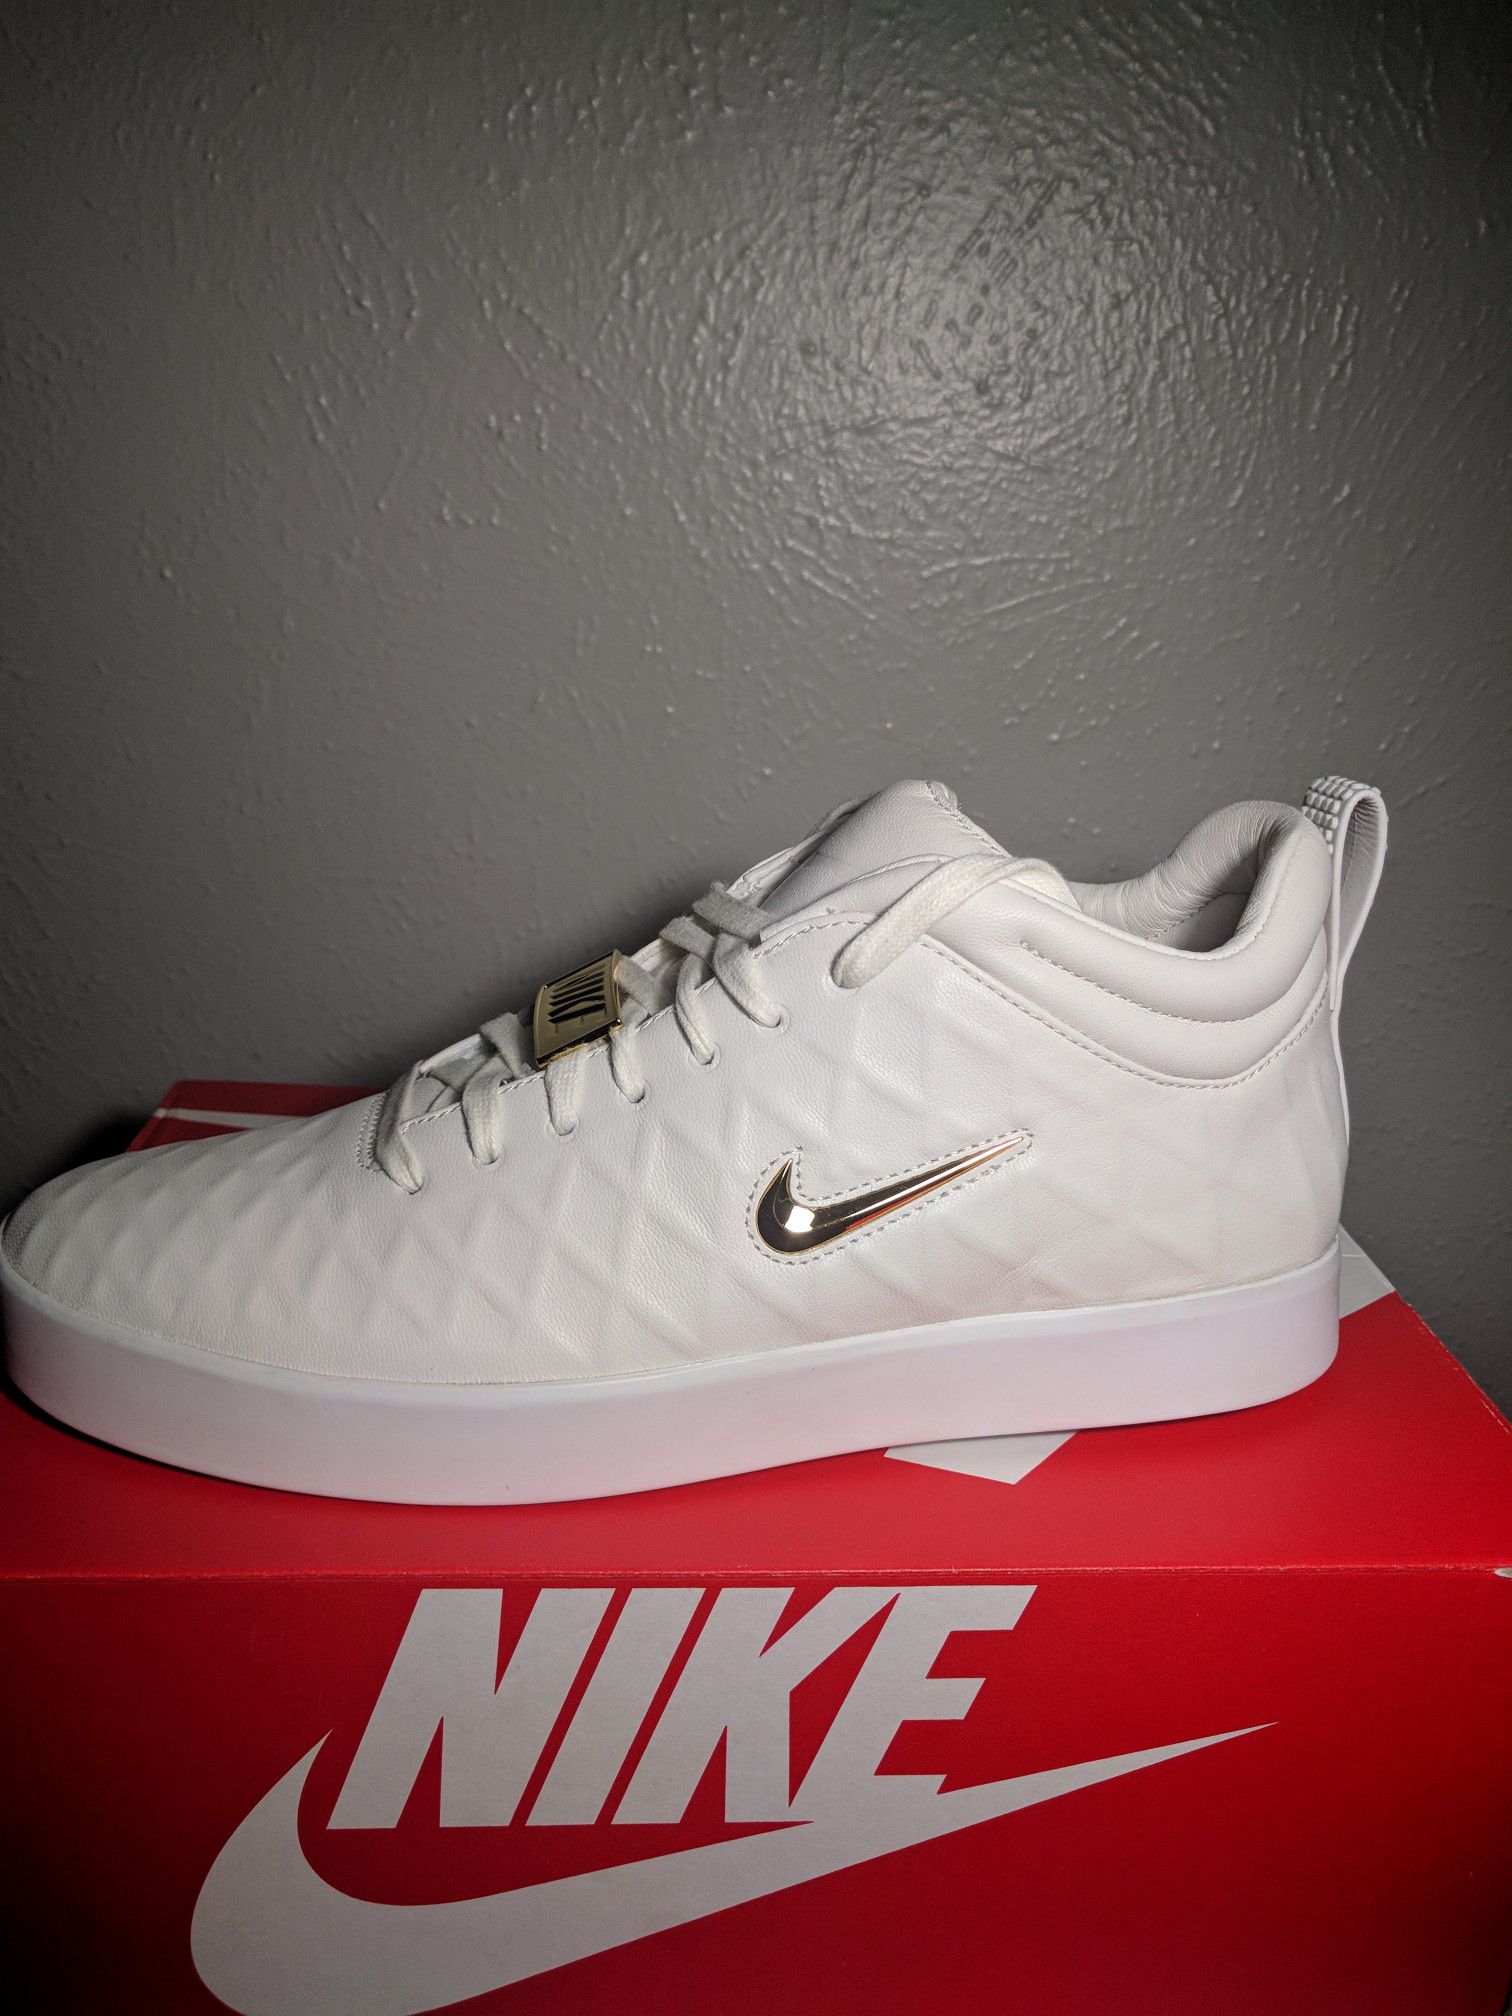 Nike Tiempo '17 Shoes/Sneakers. Size 10.5 for Sale in Richardson, TX - OfferUp